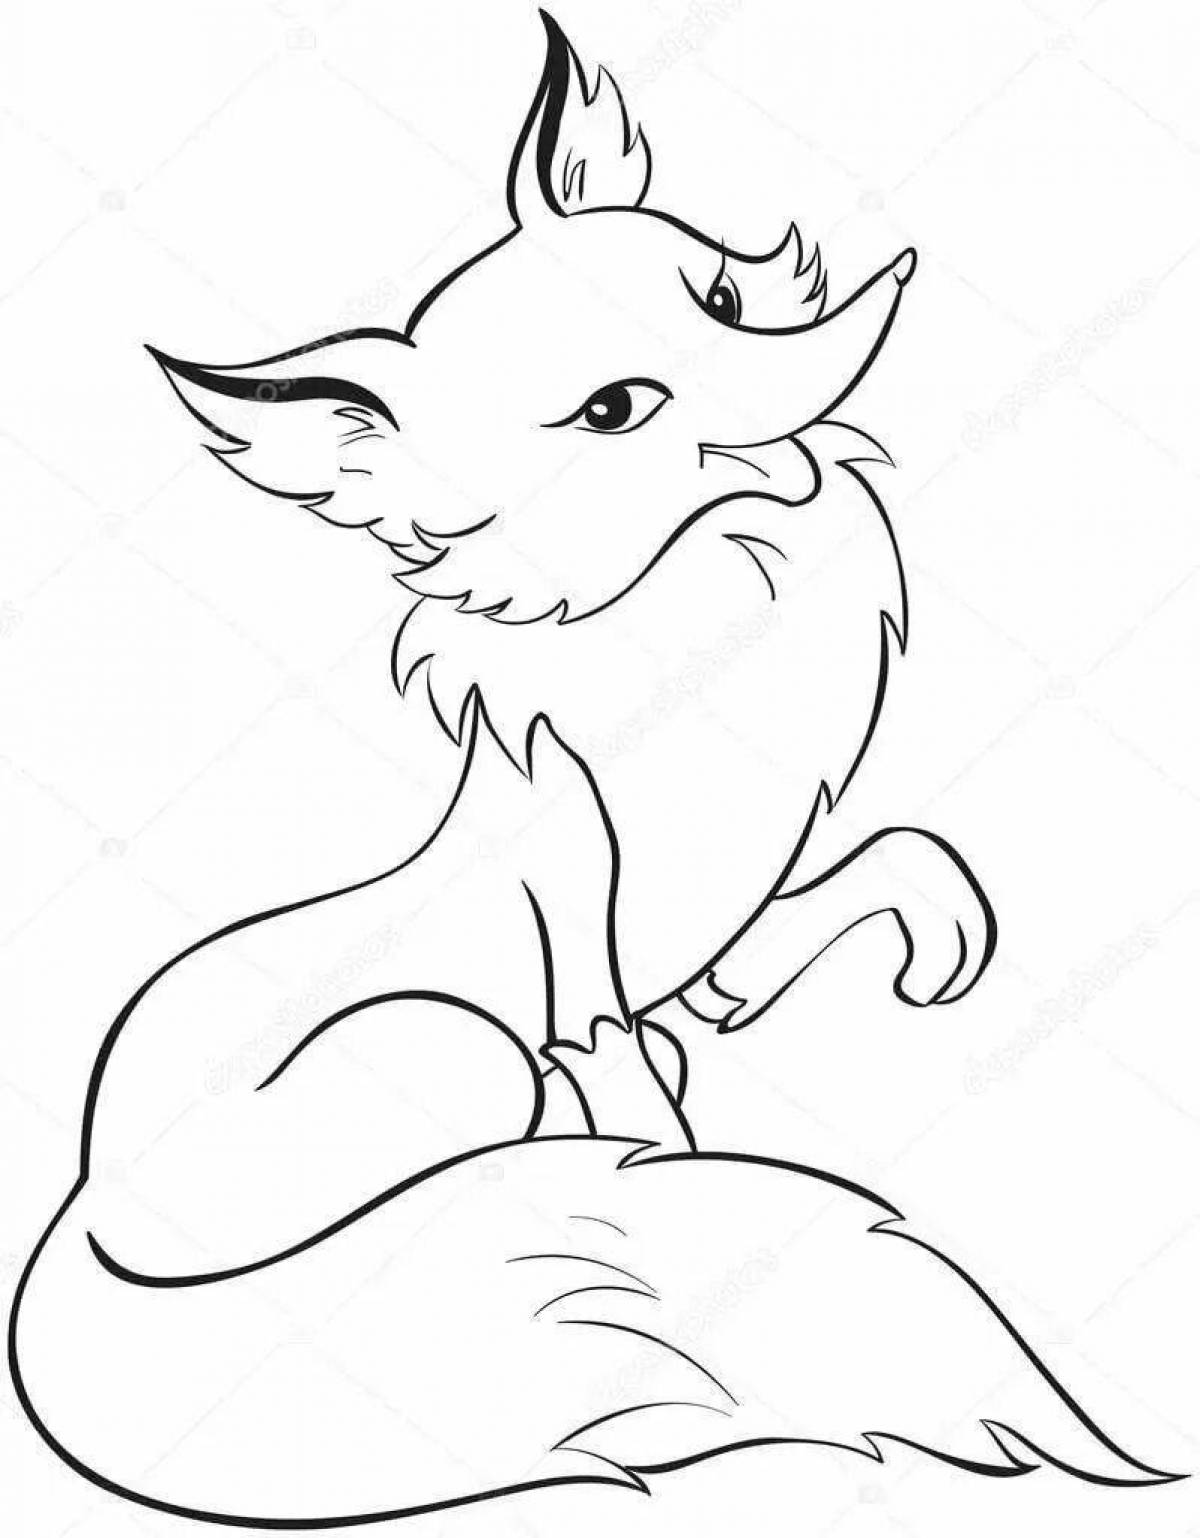 Coloring page playful sitting fox